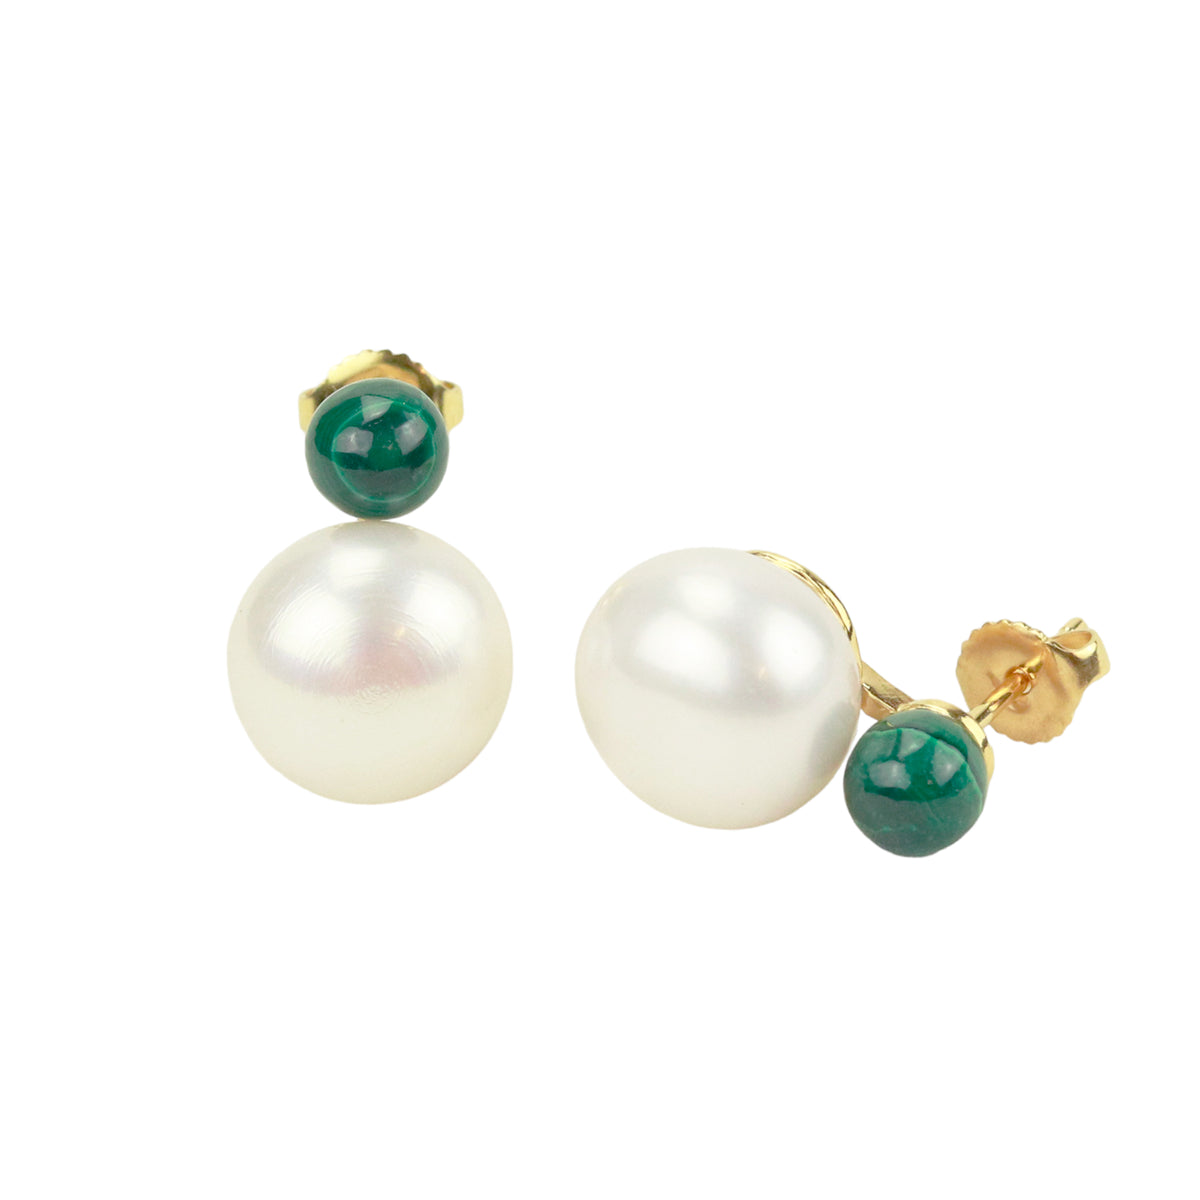 Pearl and Faceted Stone Stud